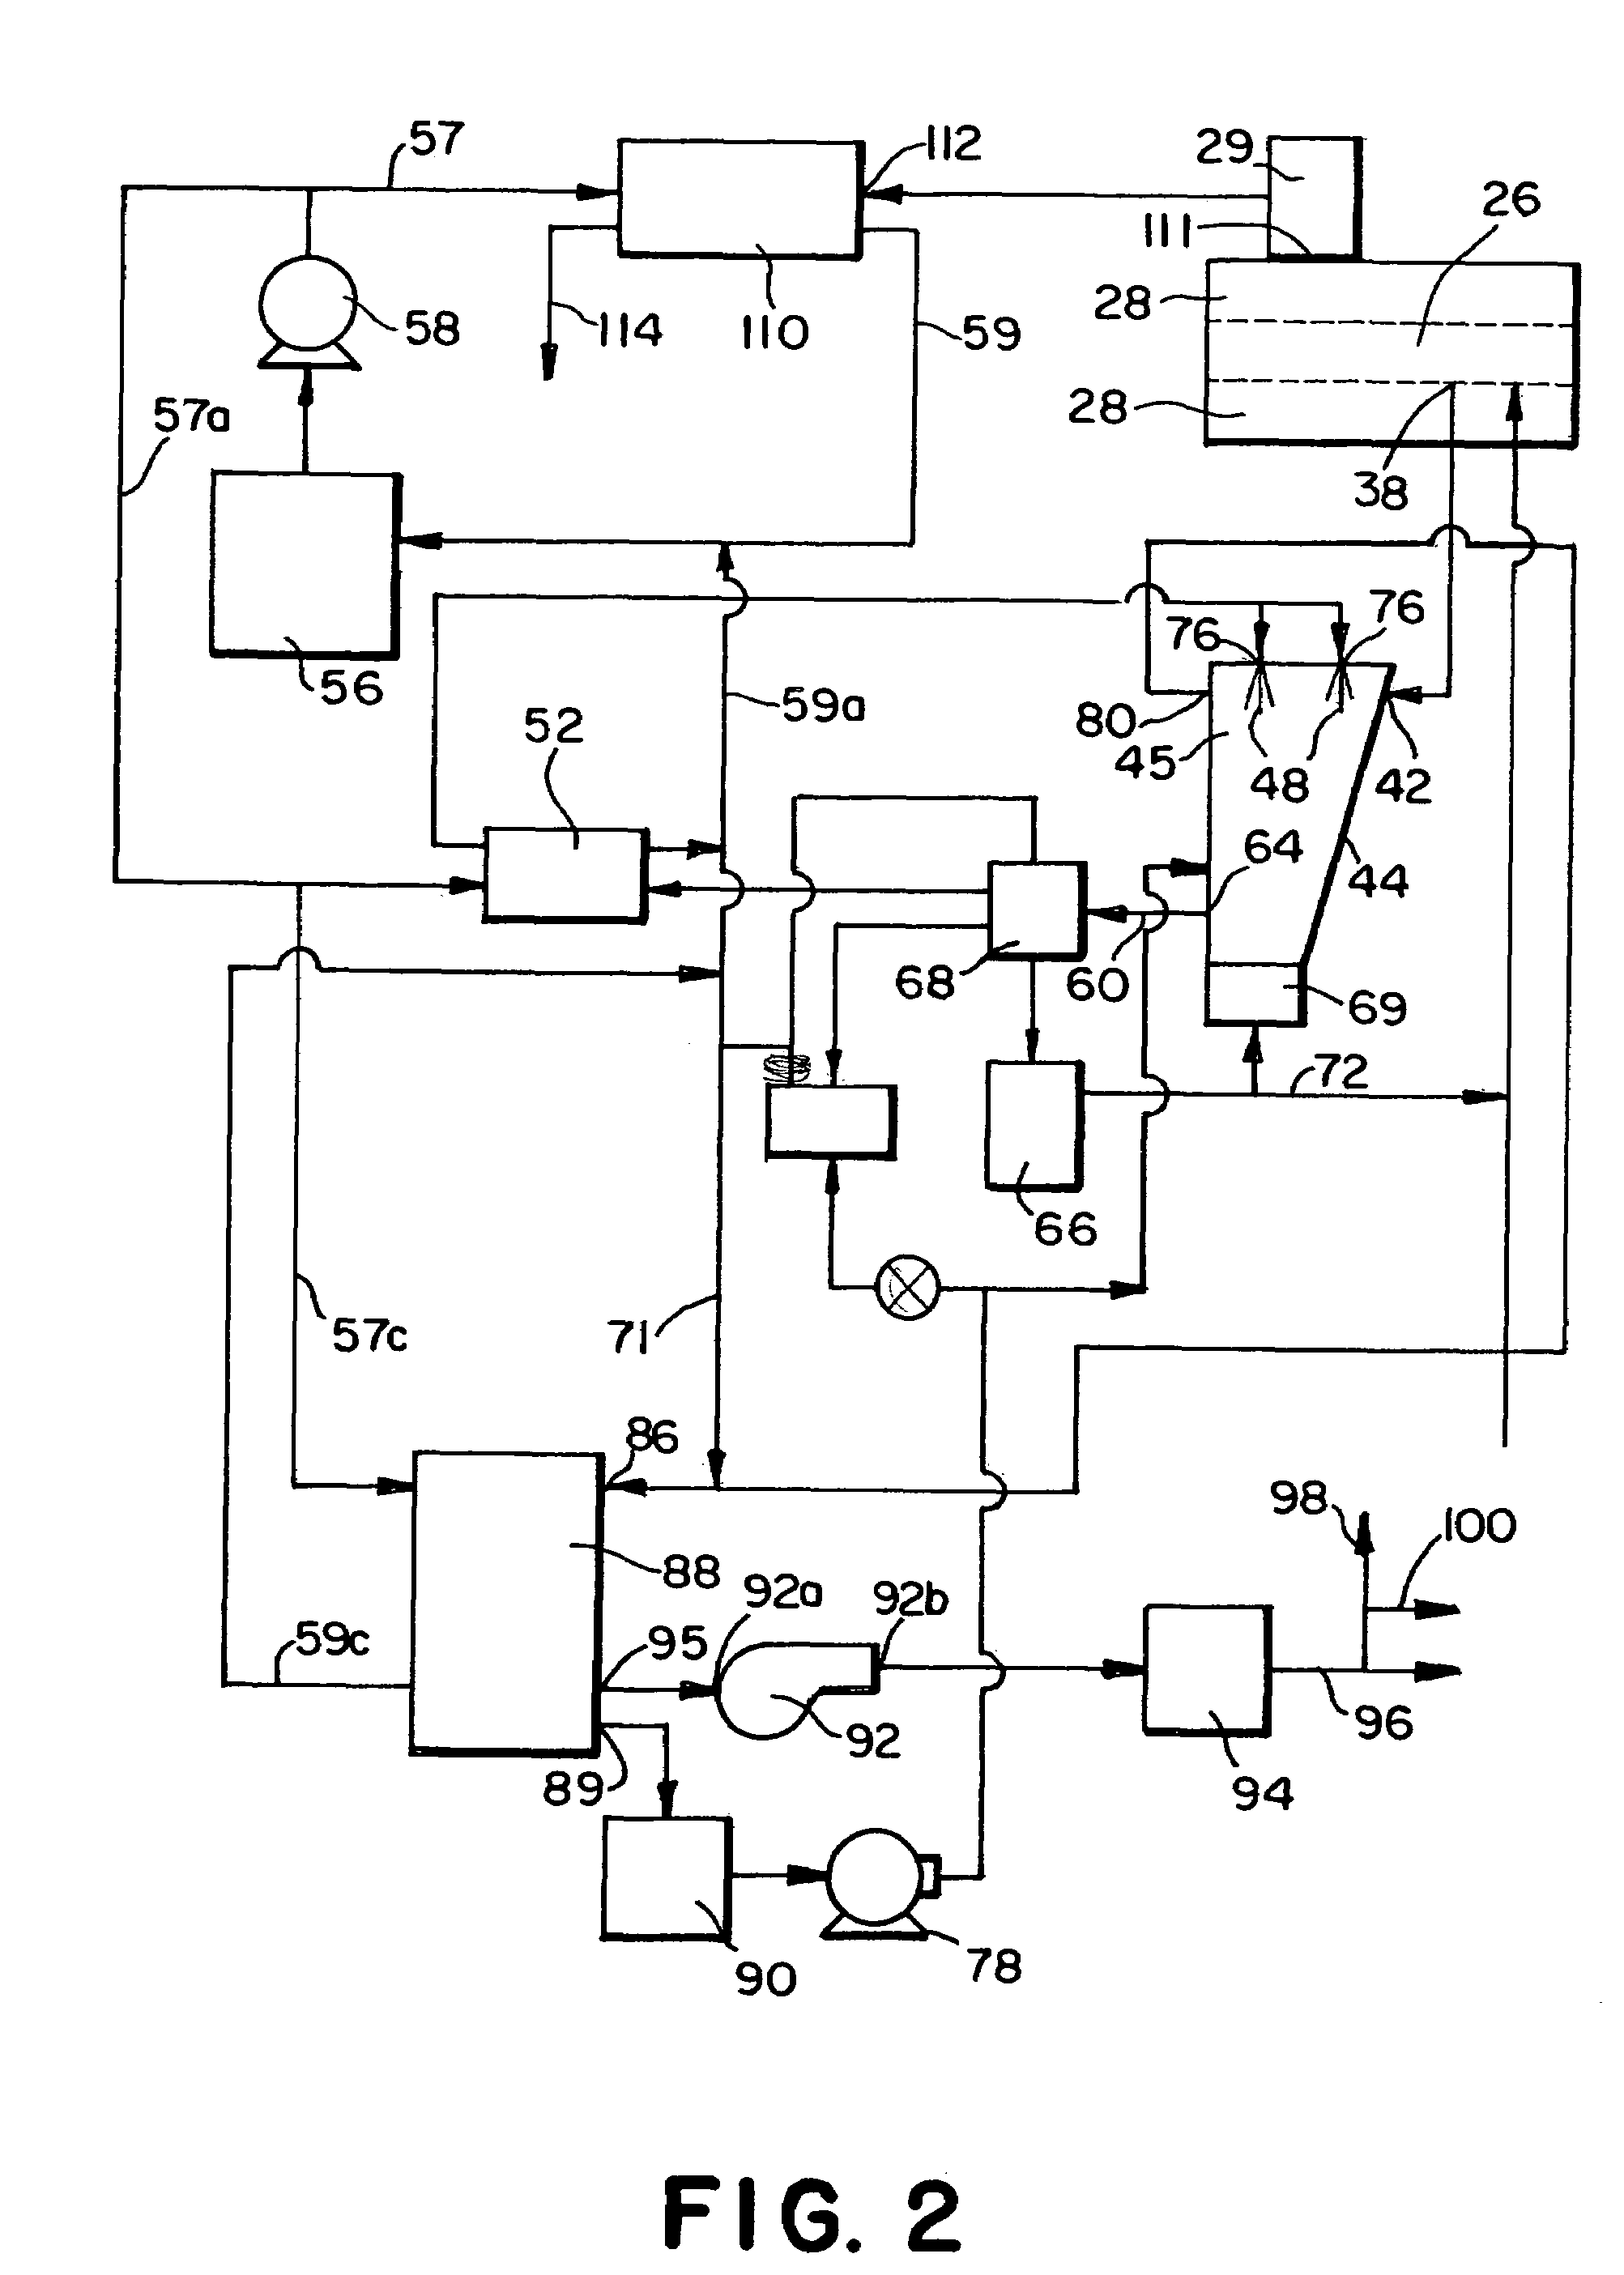 Apparatus for pyrolyzing tire shreds and tire pyrolysis systems